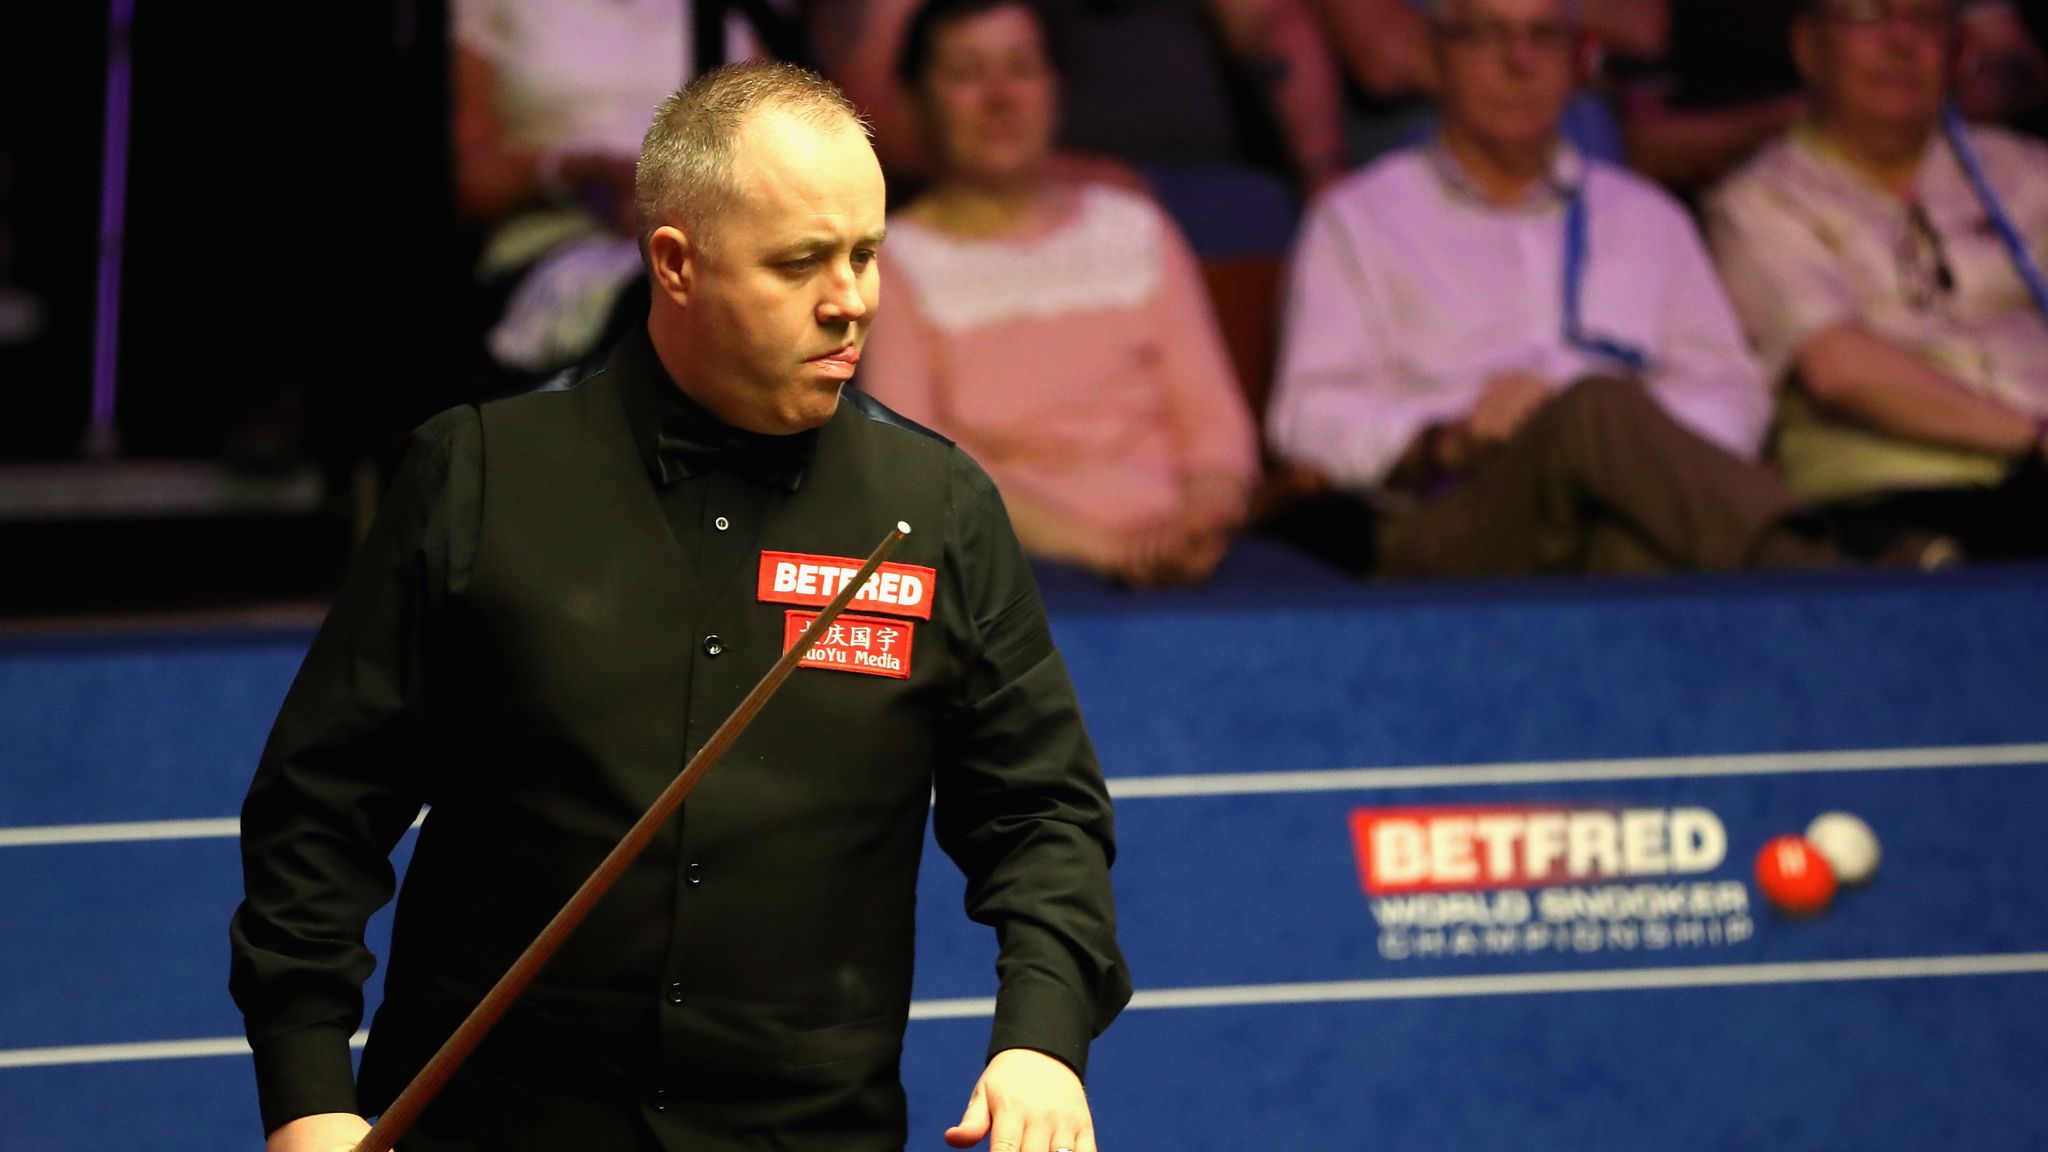 Mark Williams to play John Higgins in World Snooker Championship final Snooker News Sky Sports